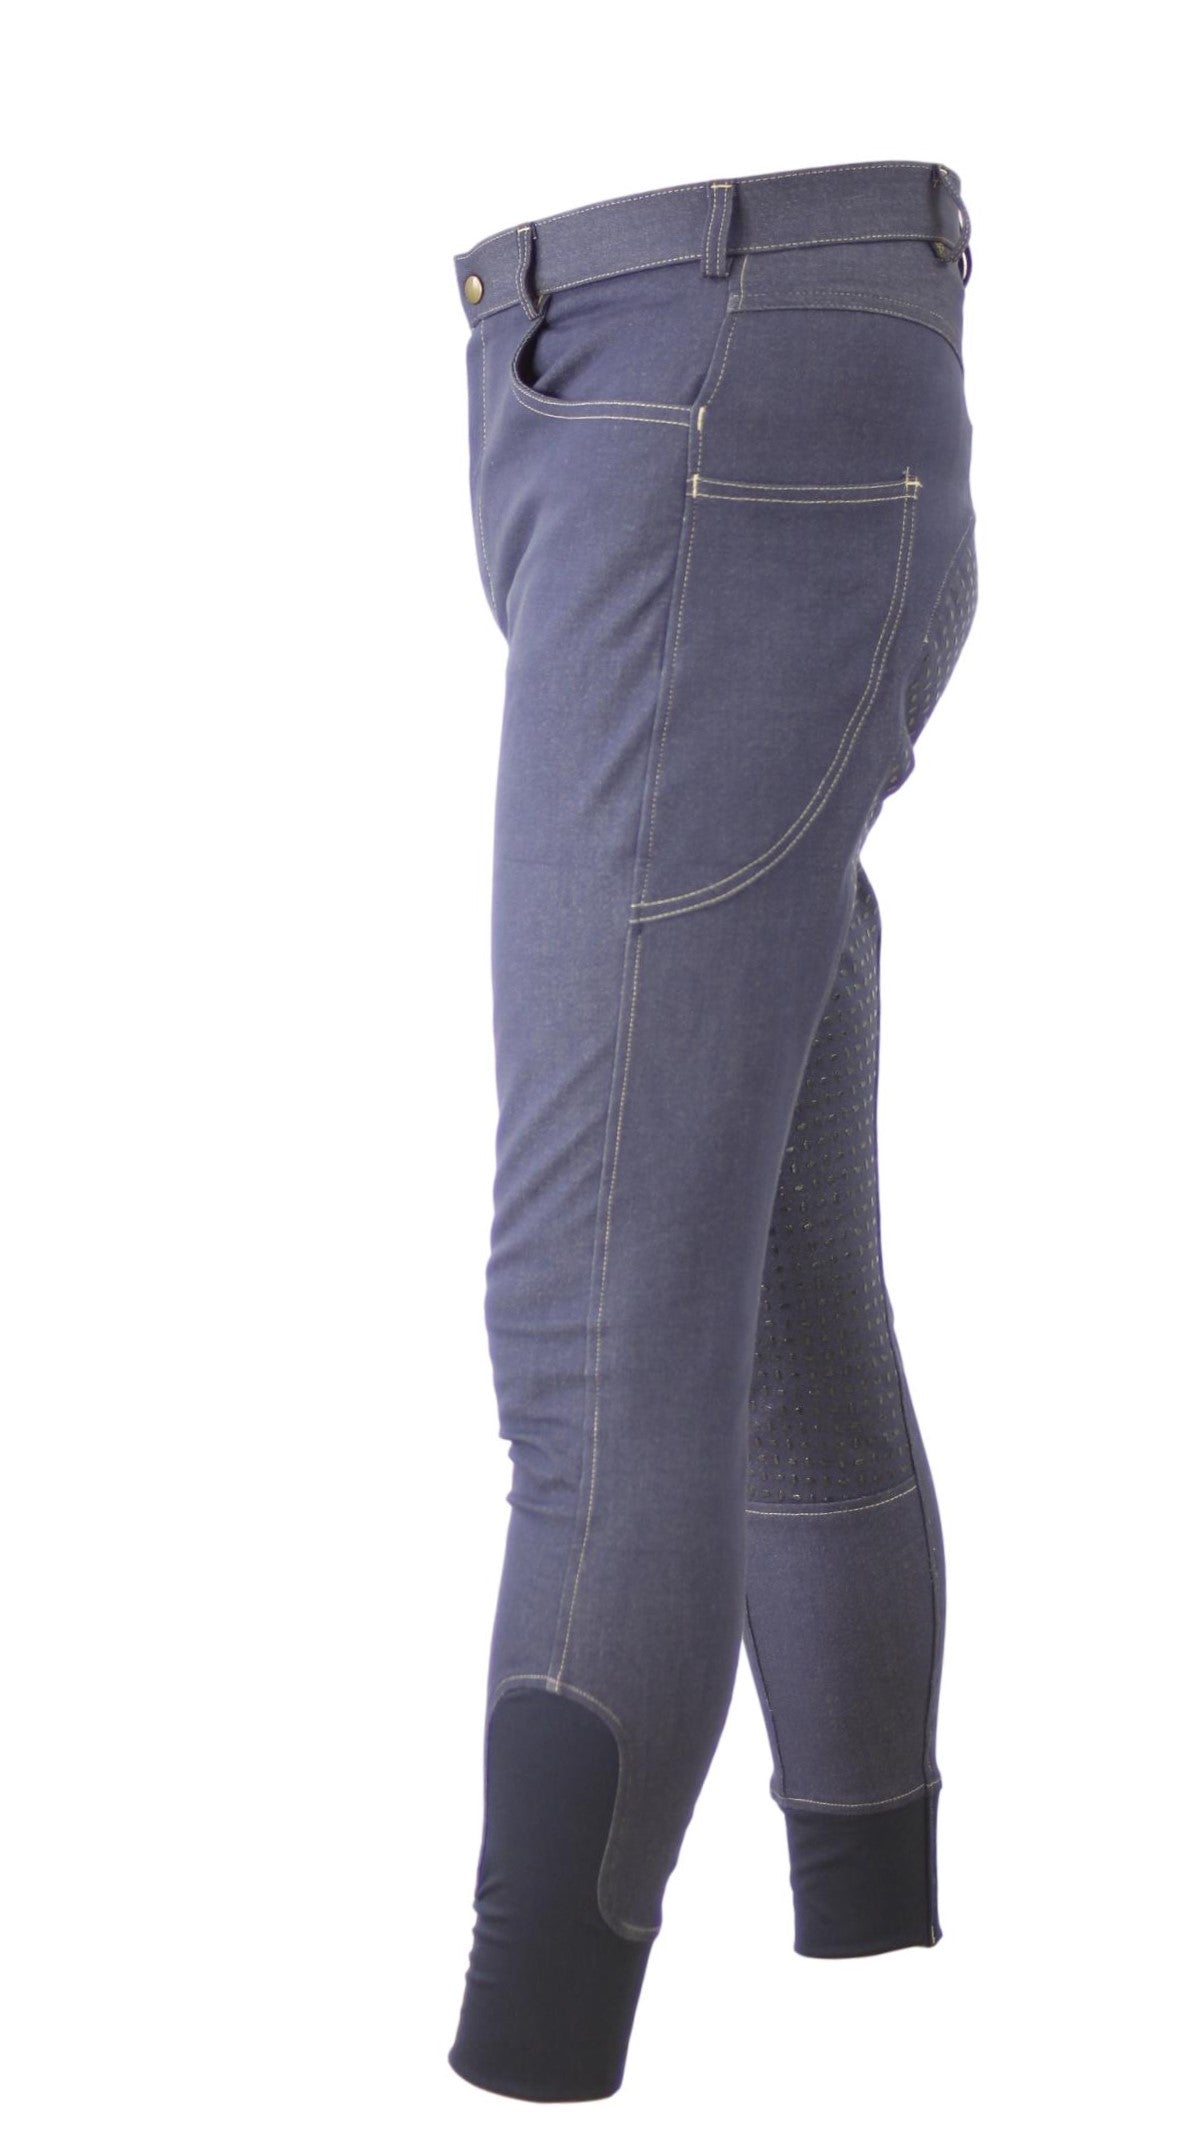 Men's Denim Breeches with silicone seat and phone pocket-Plum Tack-The Equestrian